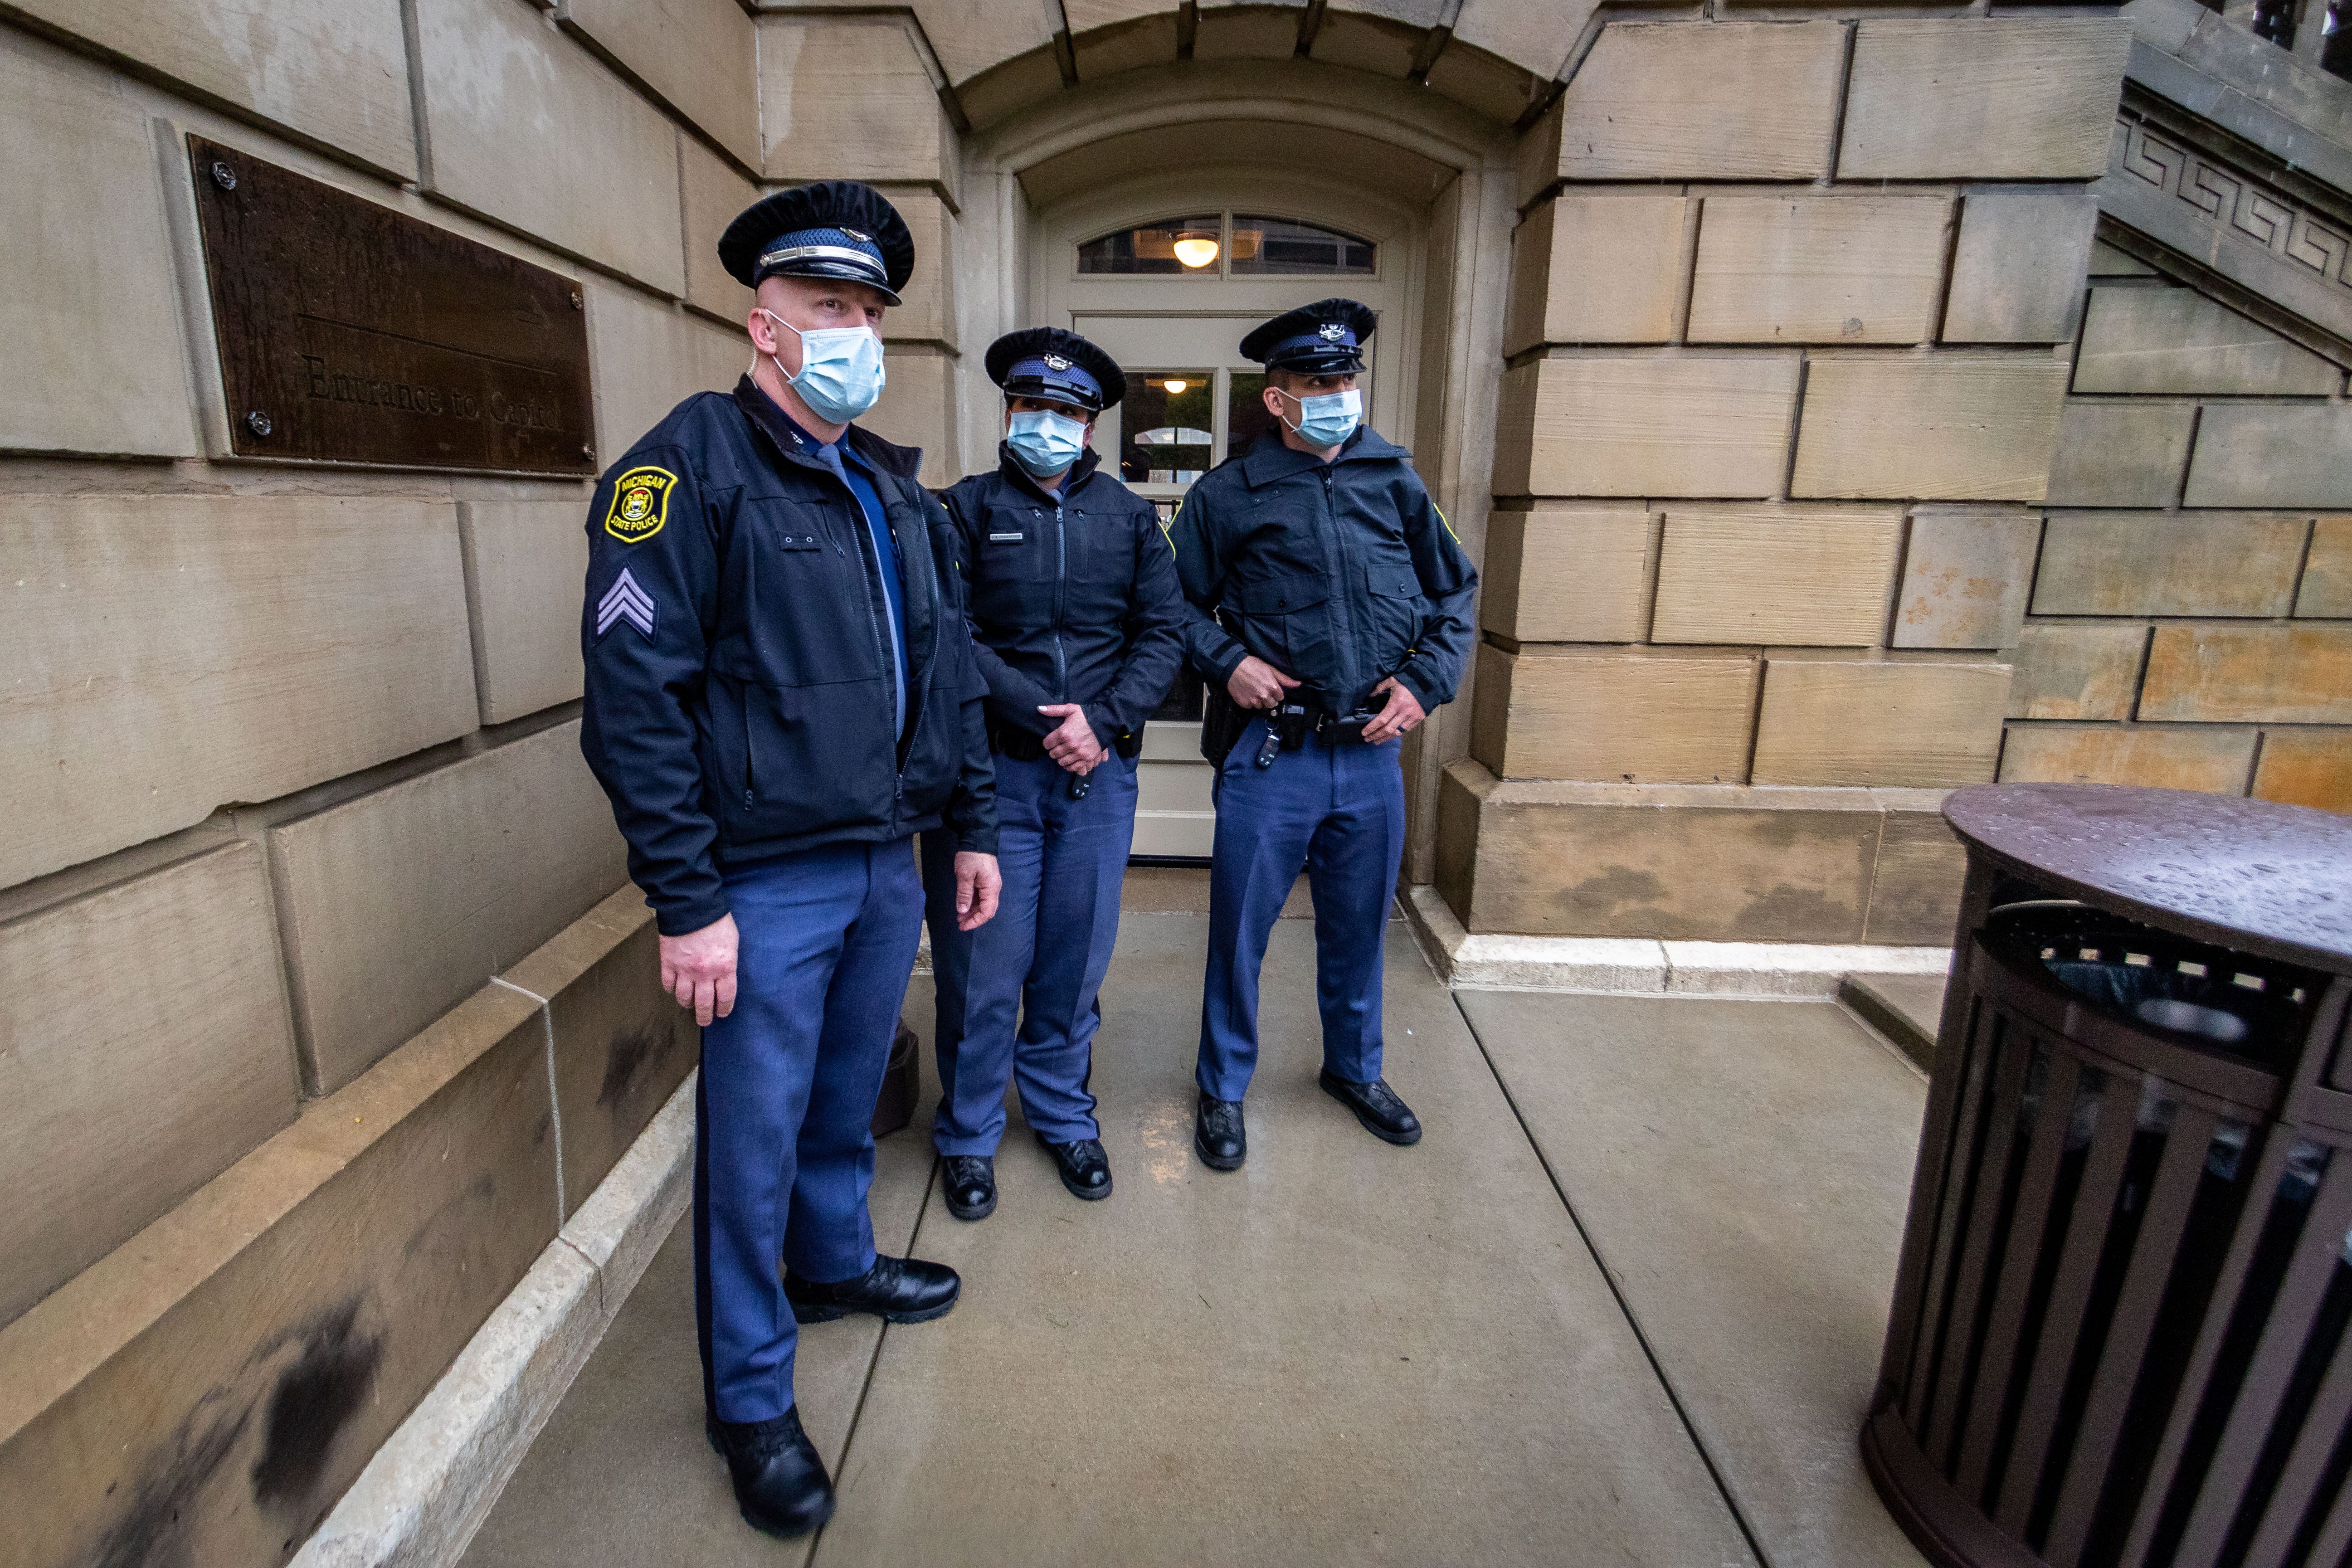 Michigan State Police stand guard at the lower entrance to the Capitol building.